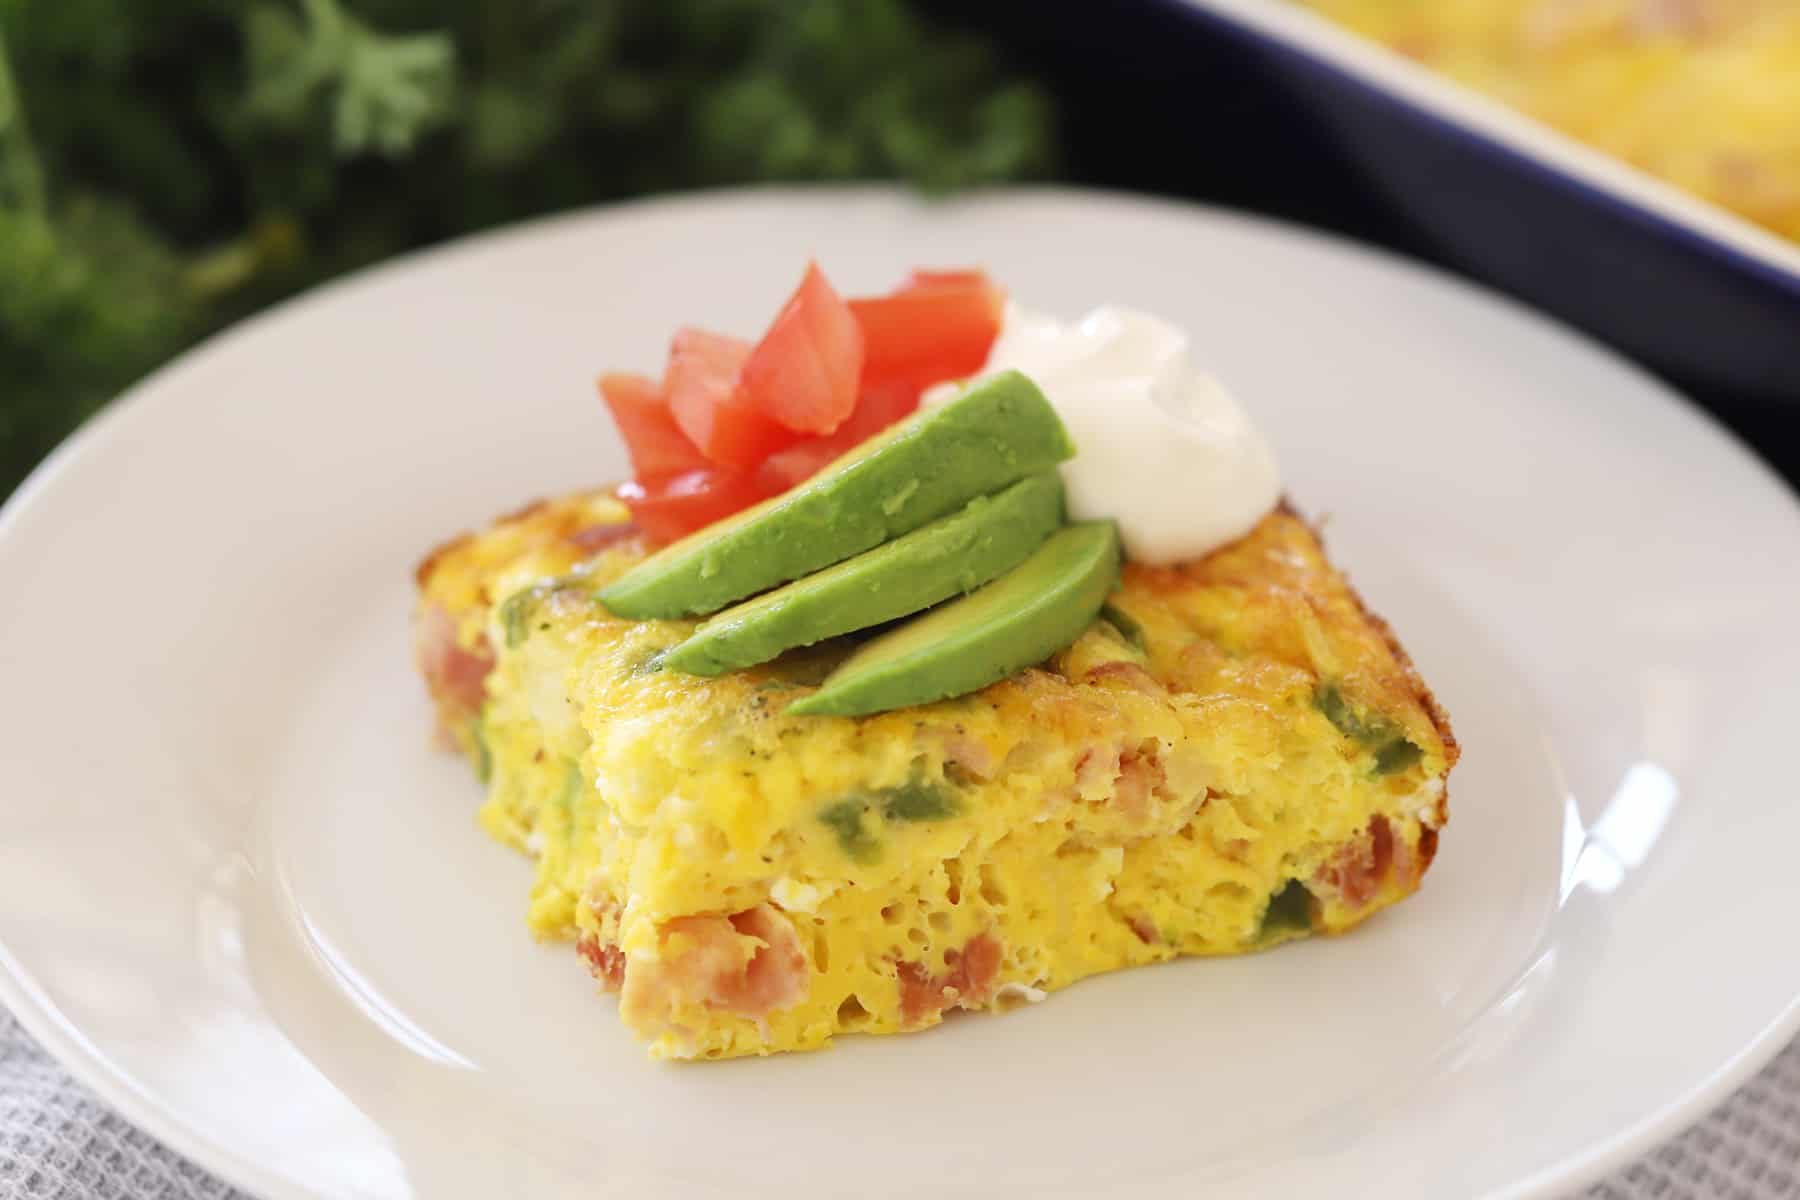 A slice of baked omelet on a white plate topped with sliced avocado, diced tomatoes and a dollop of sour cream.